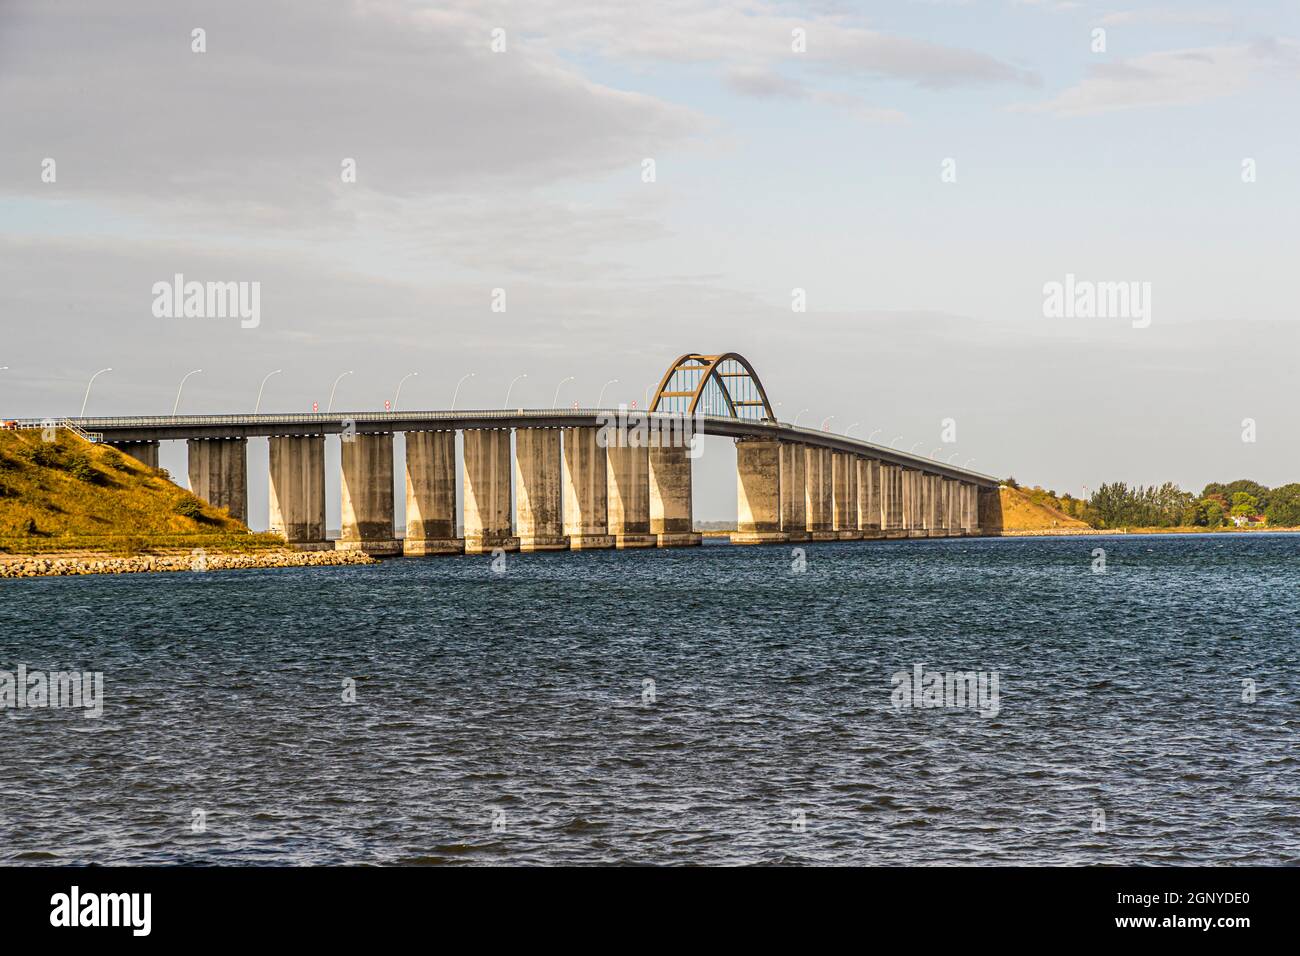 Langeland Bridge, which connects Langeland with the small island of Siø and via the next island Täsinge with the island of Funen (Fyn). Langeland, Denmark Stock Photo